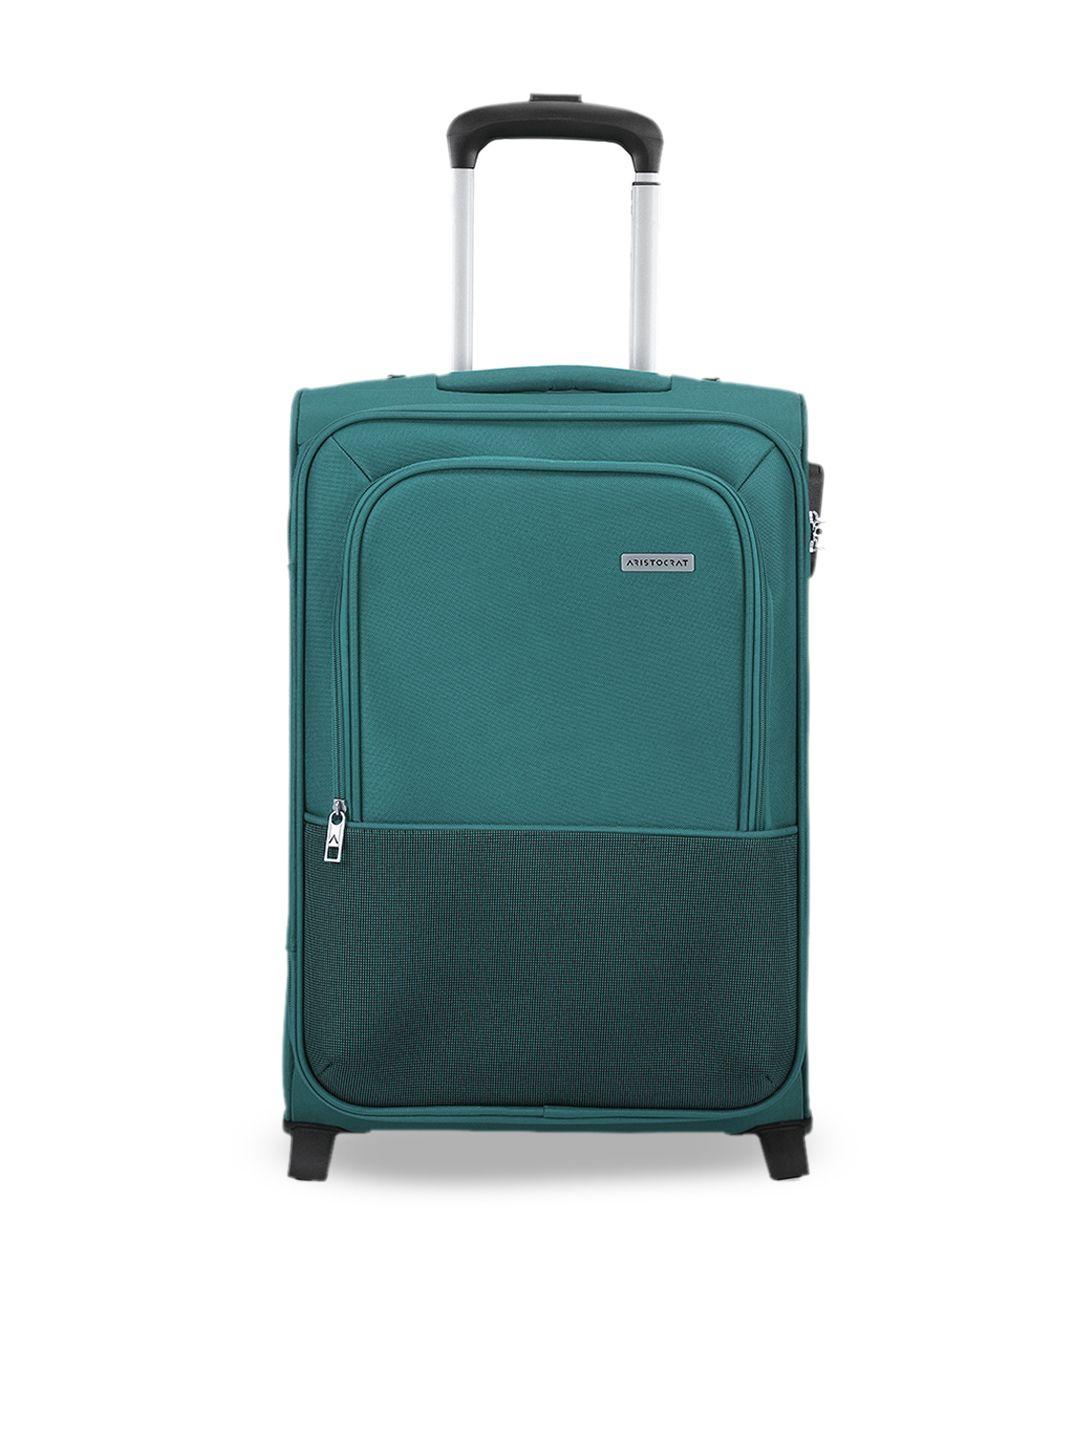 aristocrat soft-sided large trolley suitcase